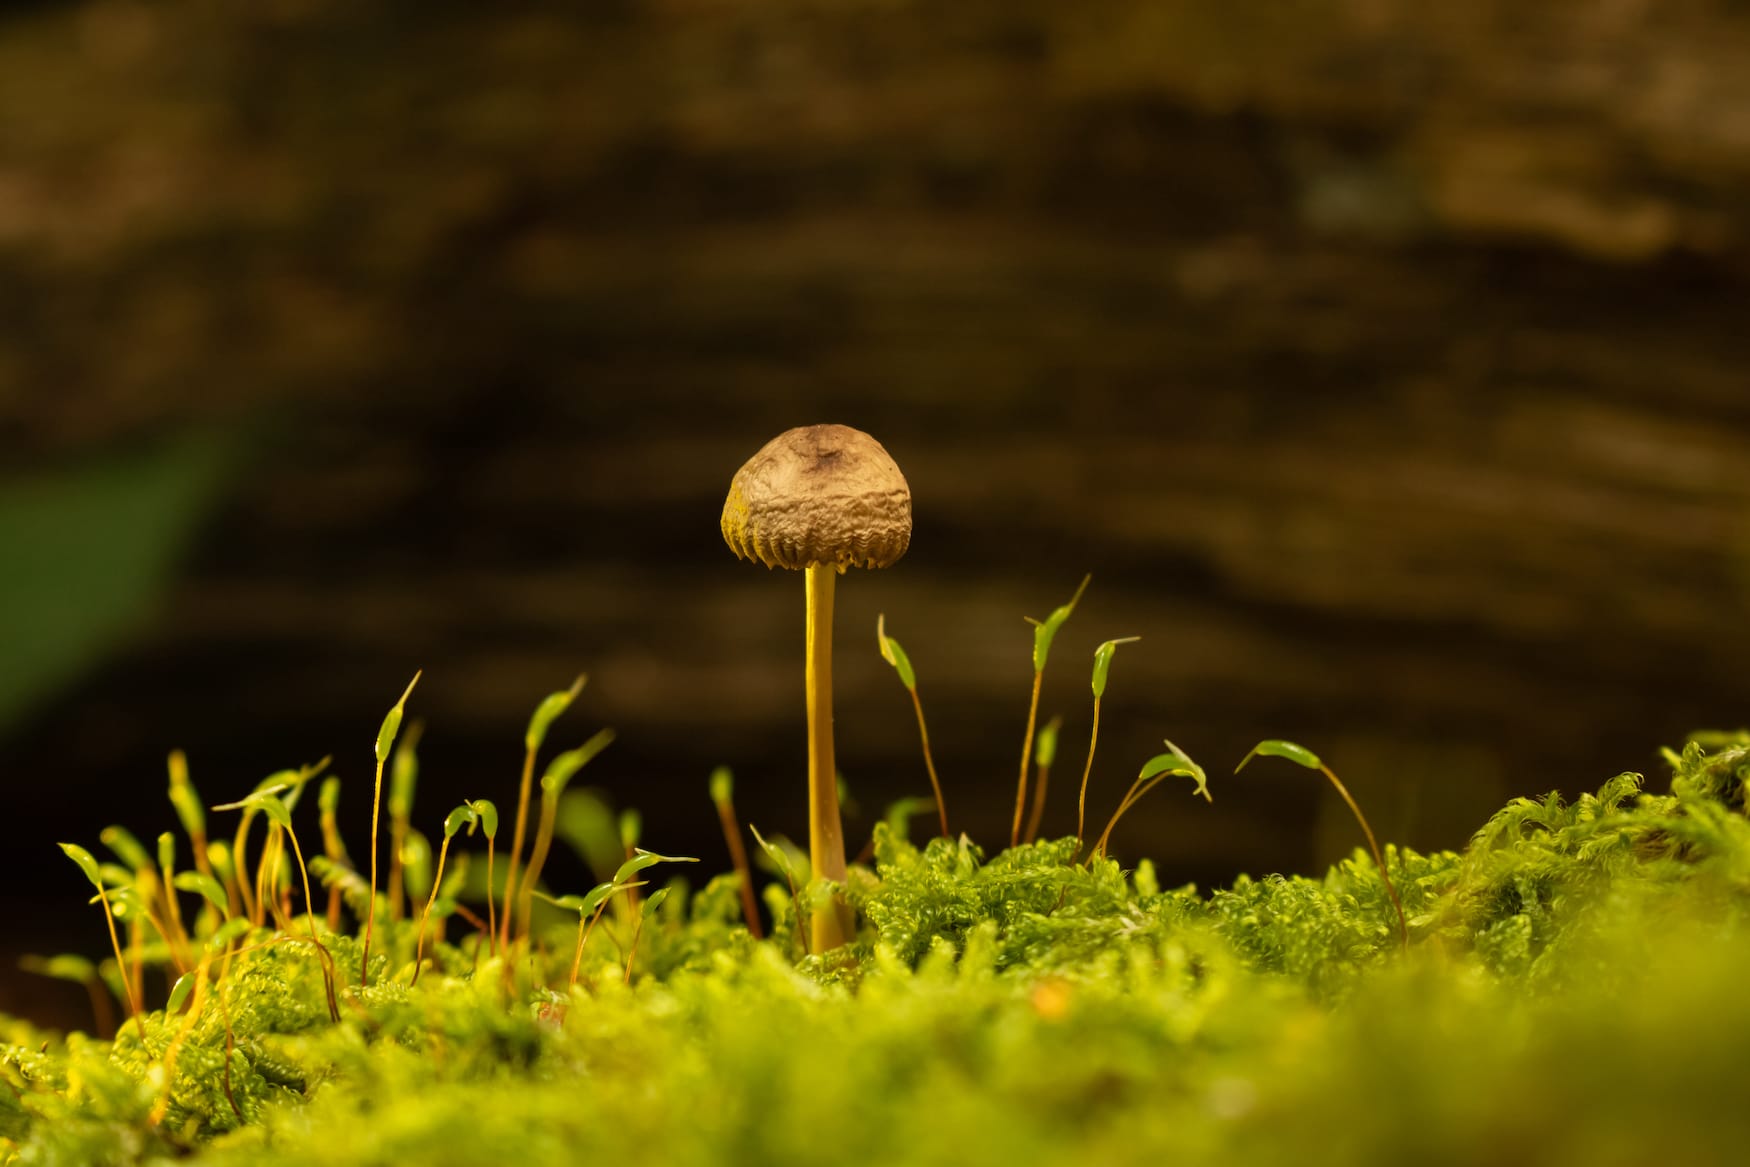 A little mushroom on the moss in the forest with a tree in the background